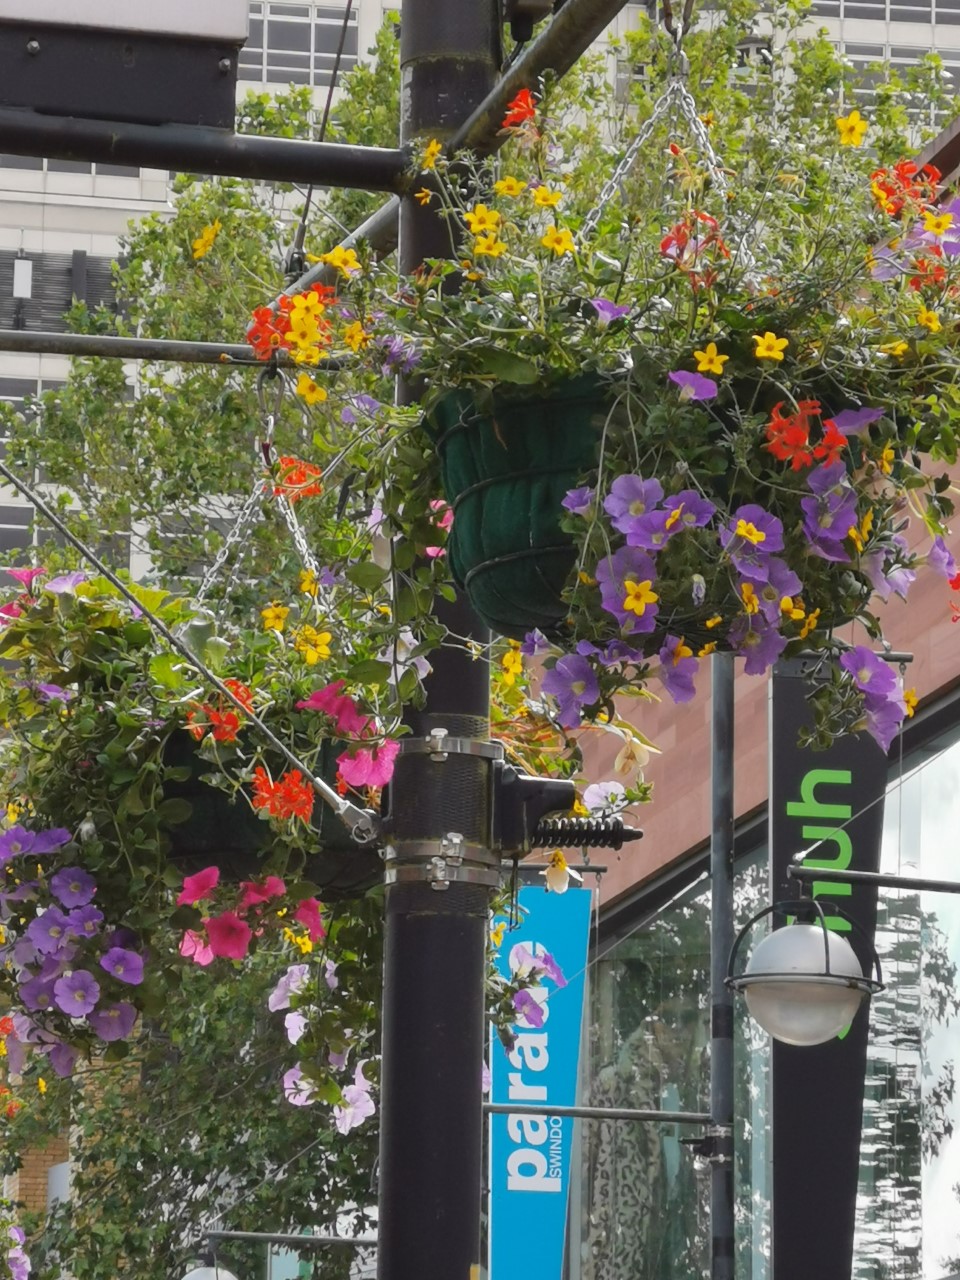 Vibrancy and colour is back in Swindon town centre as over 140 floral hanging baskets return